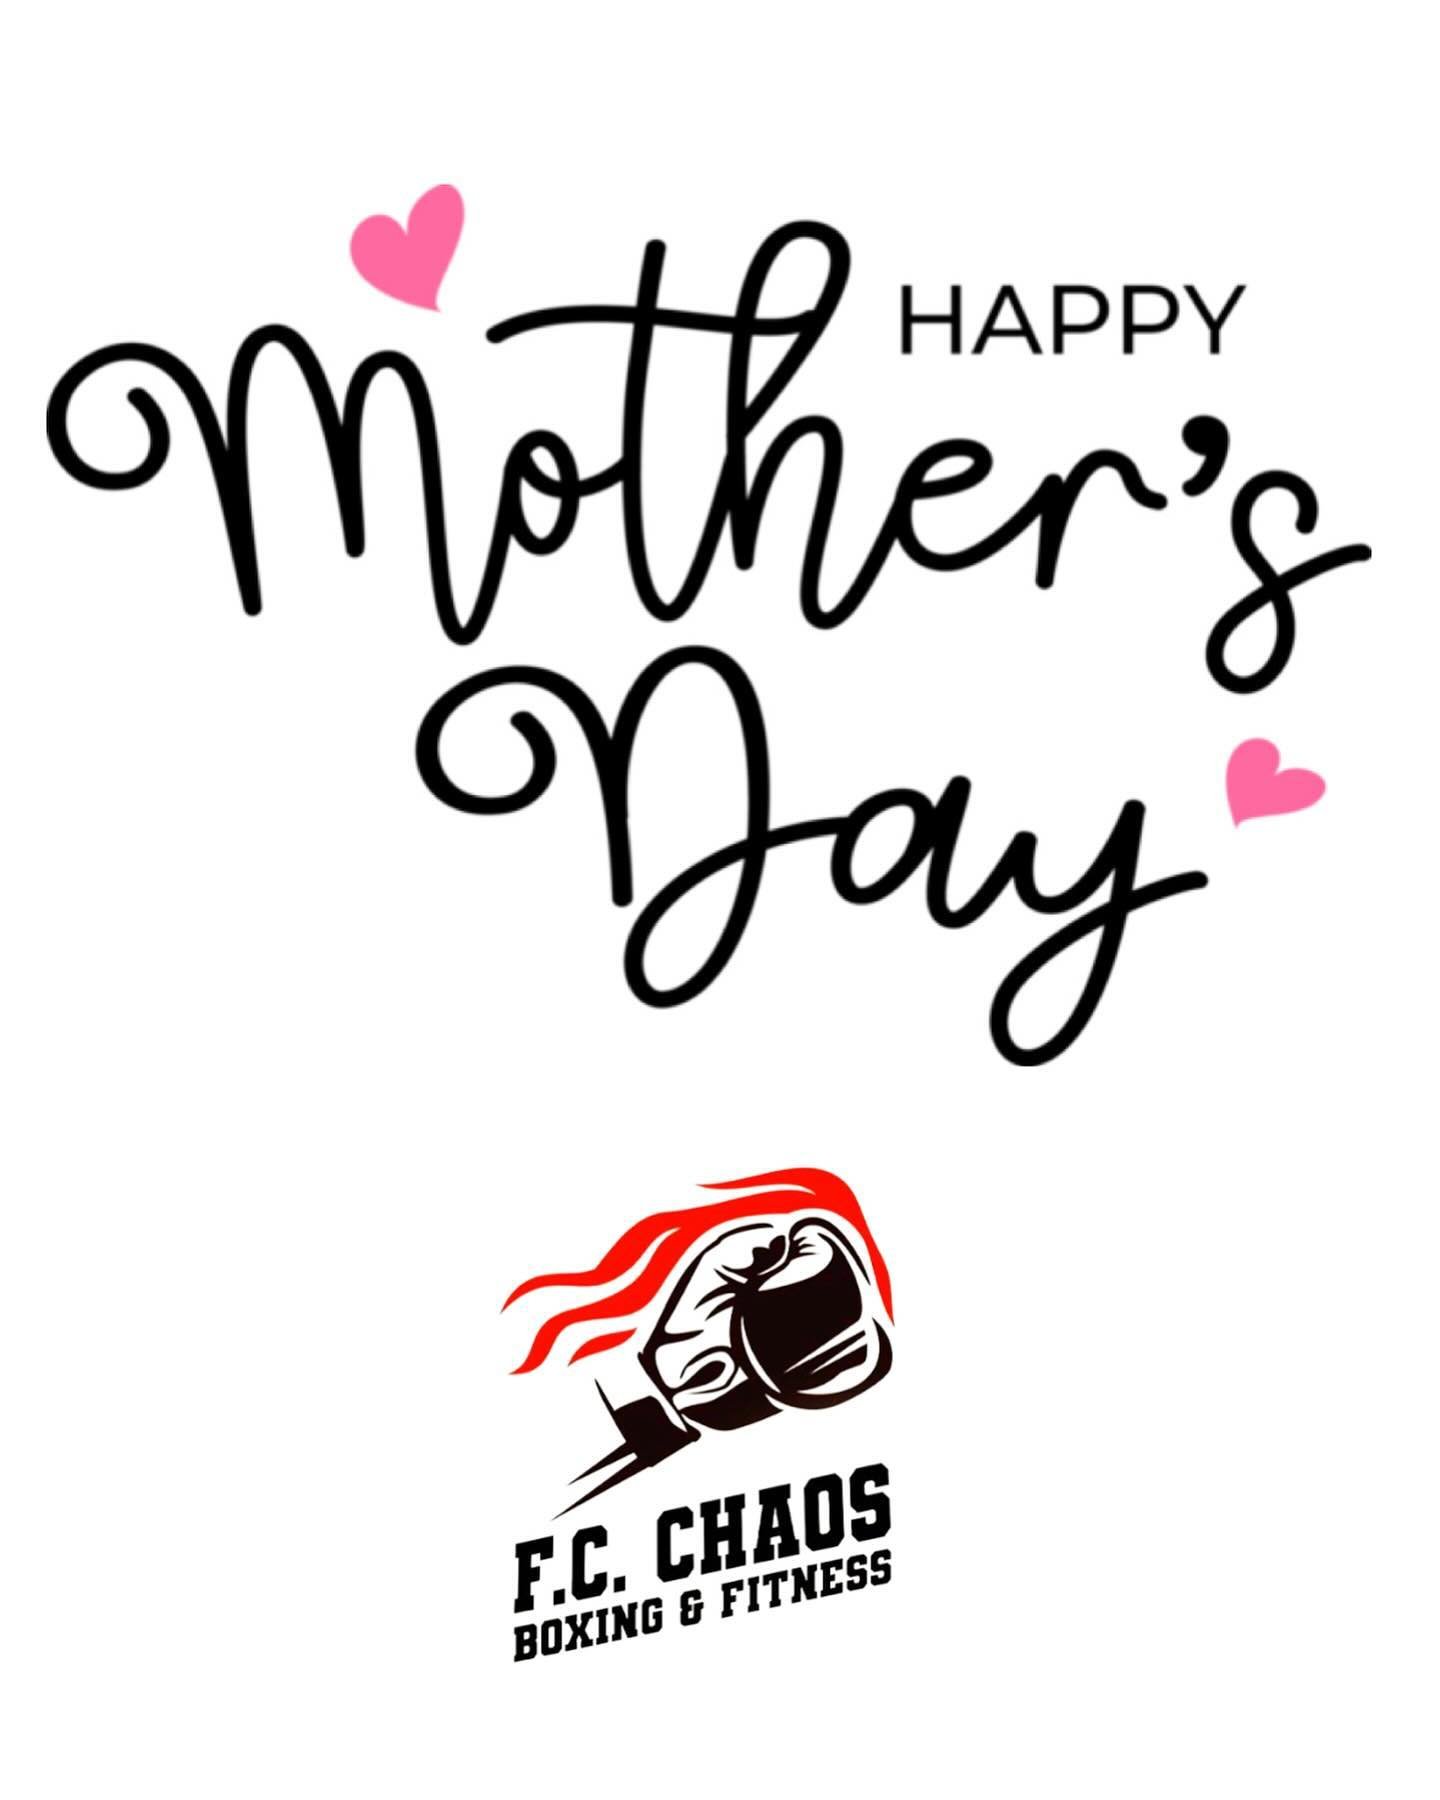 Happy Mother&rsquo;s Day to our #chaos moms &amp; all of the moms out there!! 🖤
.
.
.
#fcchaos #fcchaosboxingandfitness #momswholift #momswhoworkout #momswhorunandlift #momsofinstagram #momsofig #dailyinspo #trending #showlove #followers #riseandshi